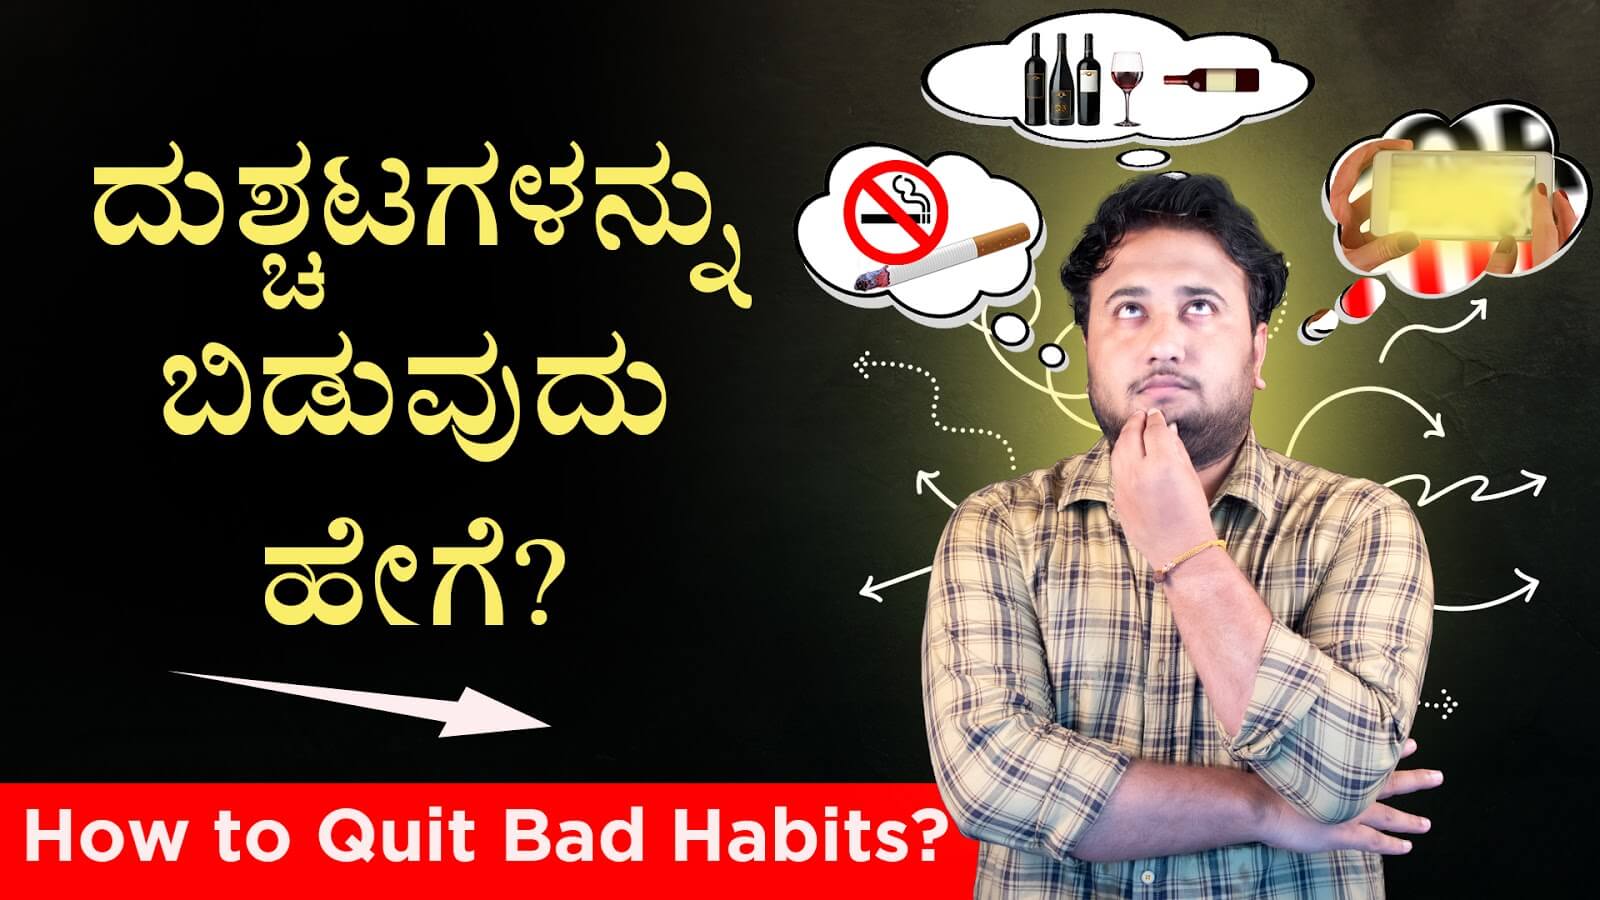 You are currently viewing ದುಶ್ಚಟಗಳನ್ನು ಬಿಡುವುದು ಹೇಗೆ? – How to quit bad habits? in Kannada